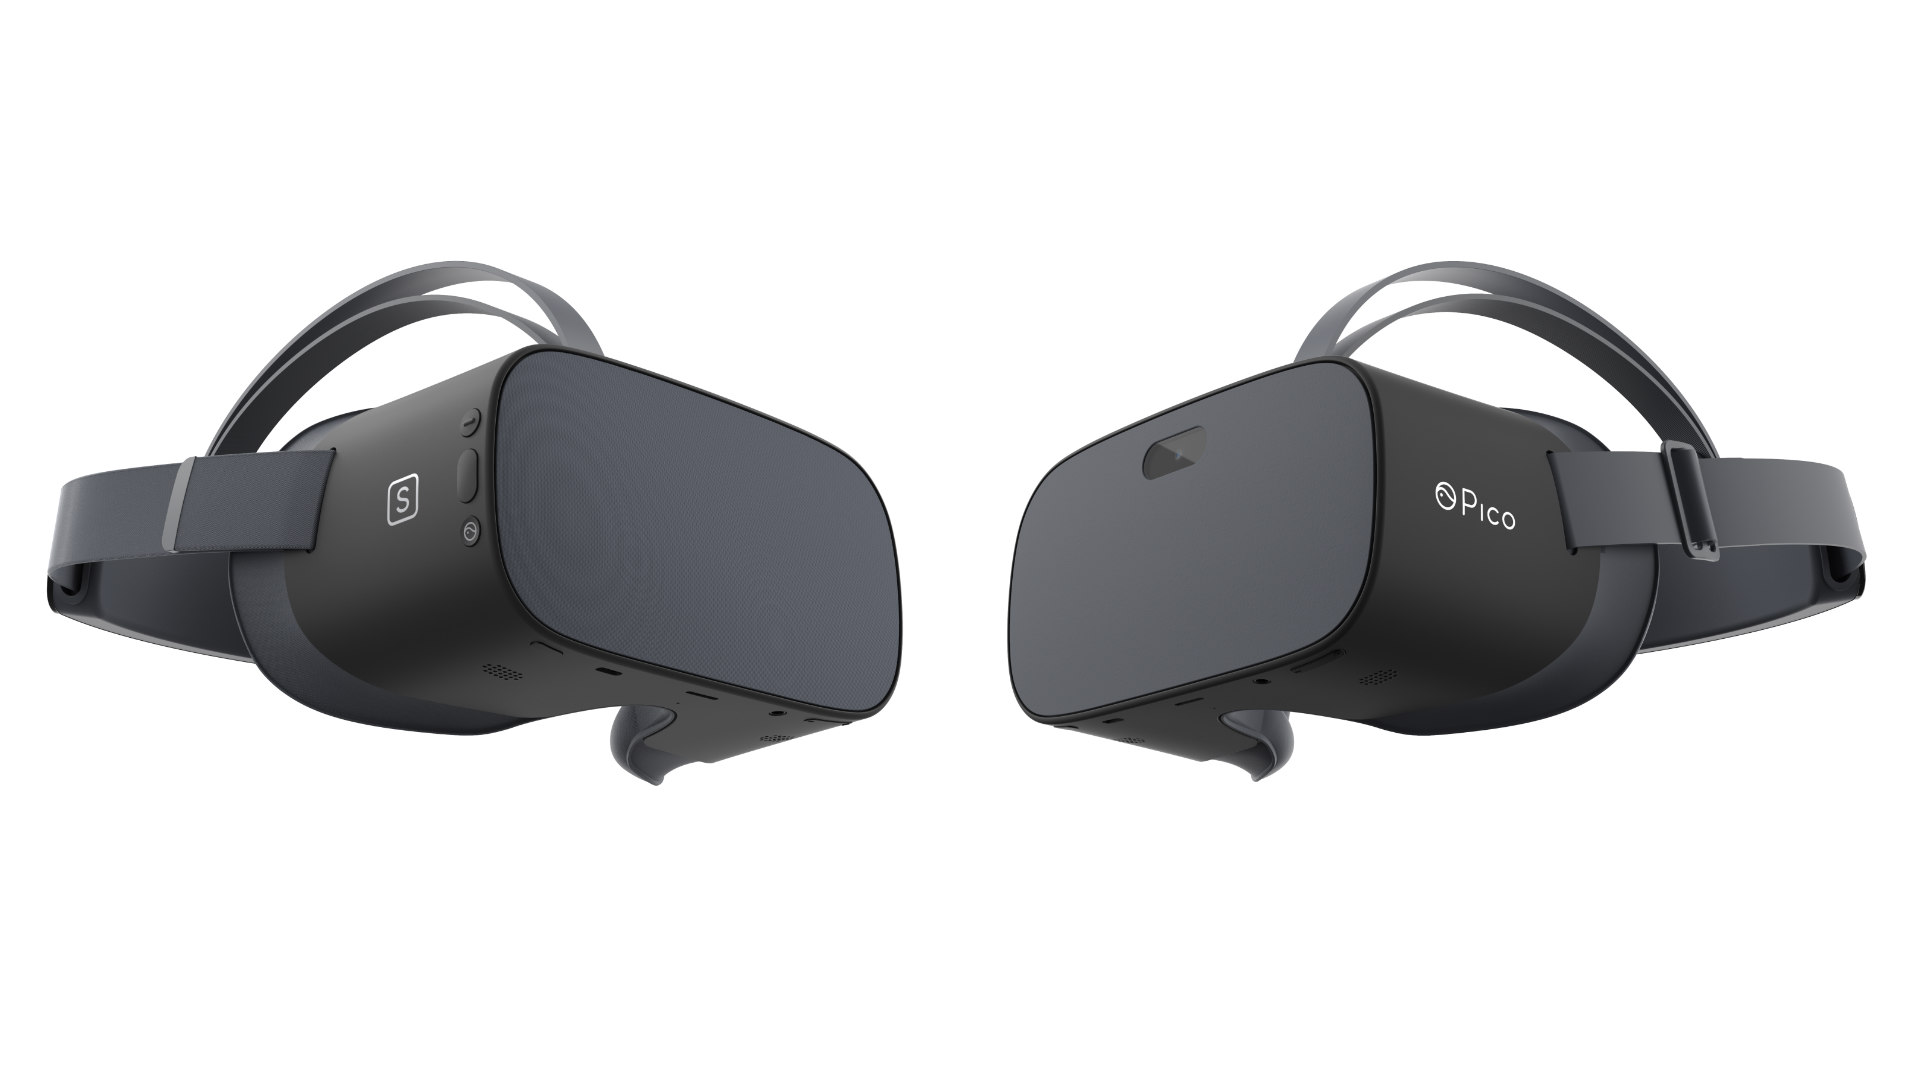 Pico Announces 2 New Versions of Its Latest 3DOF VR Headset to